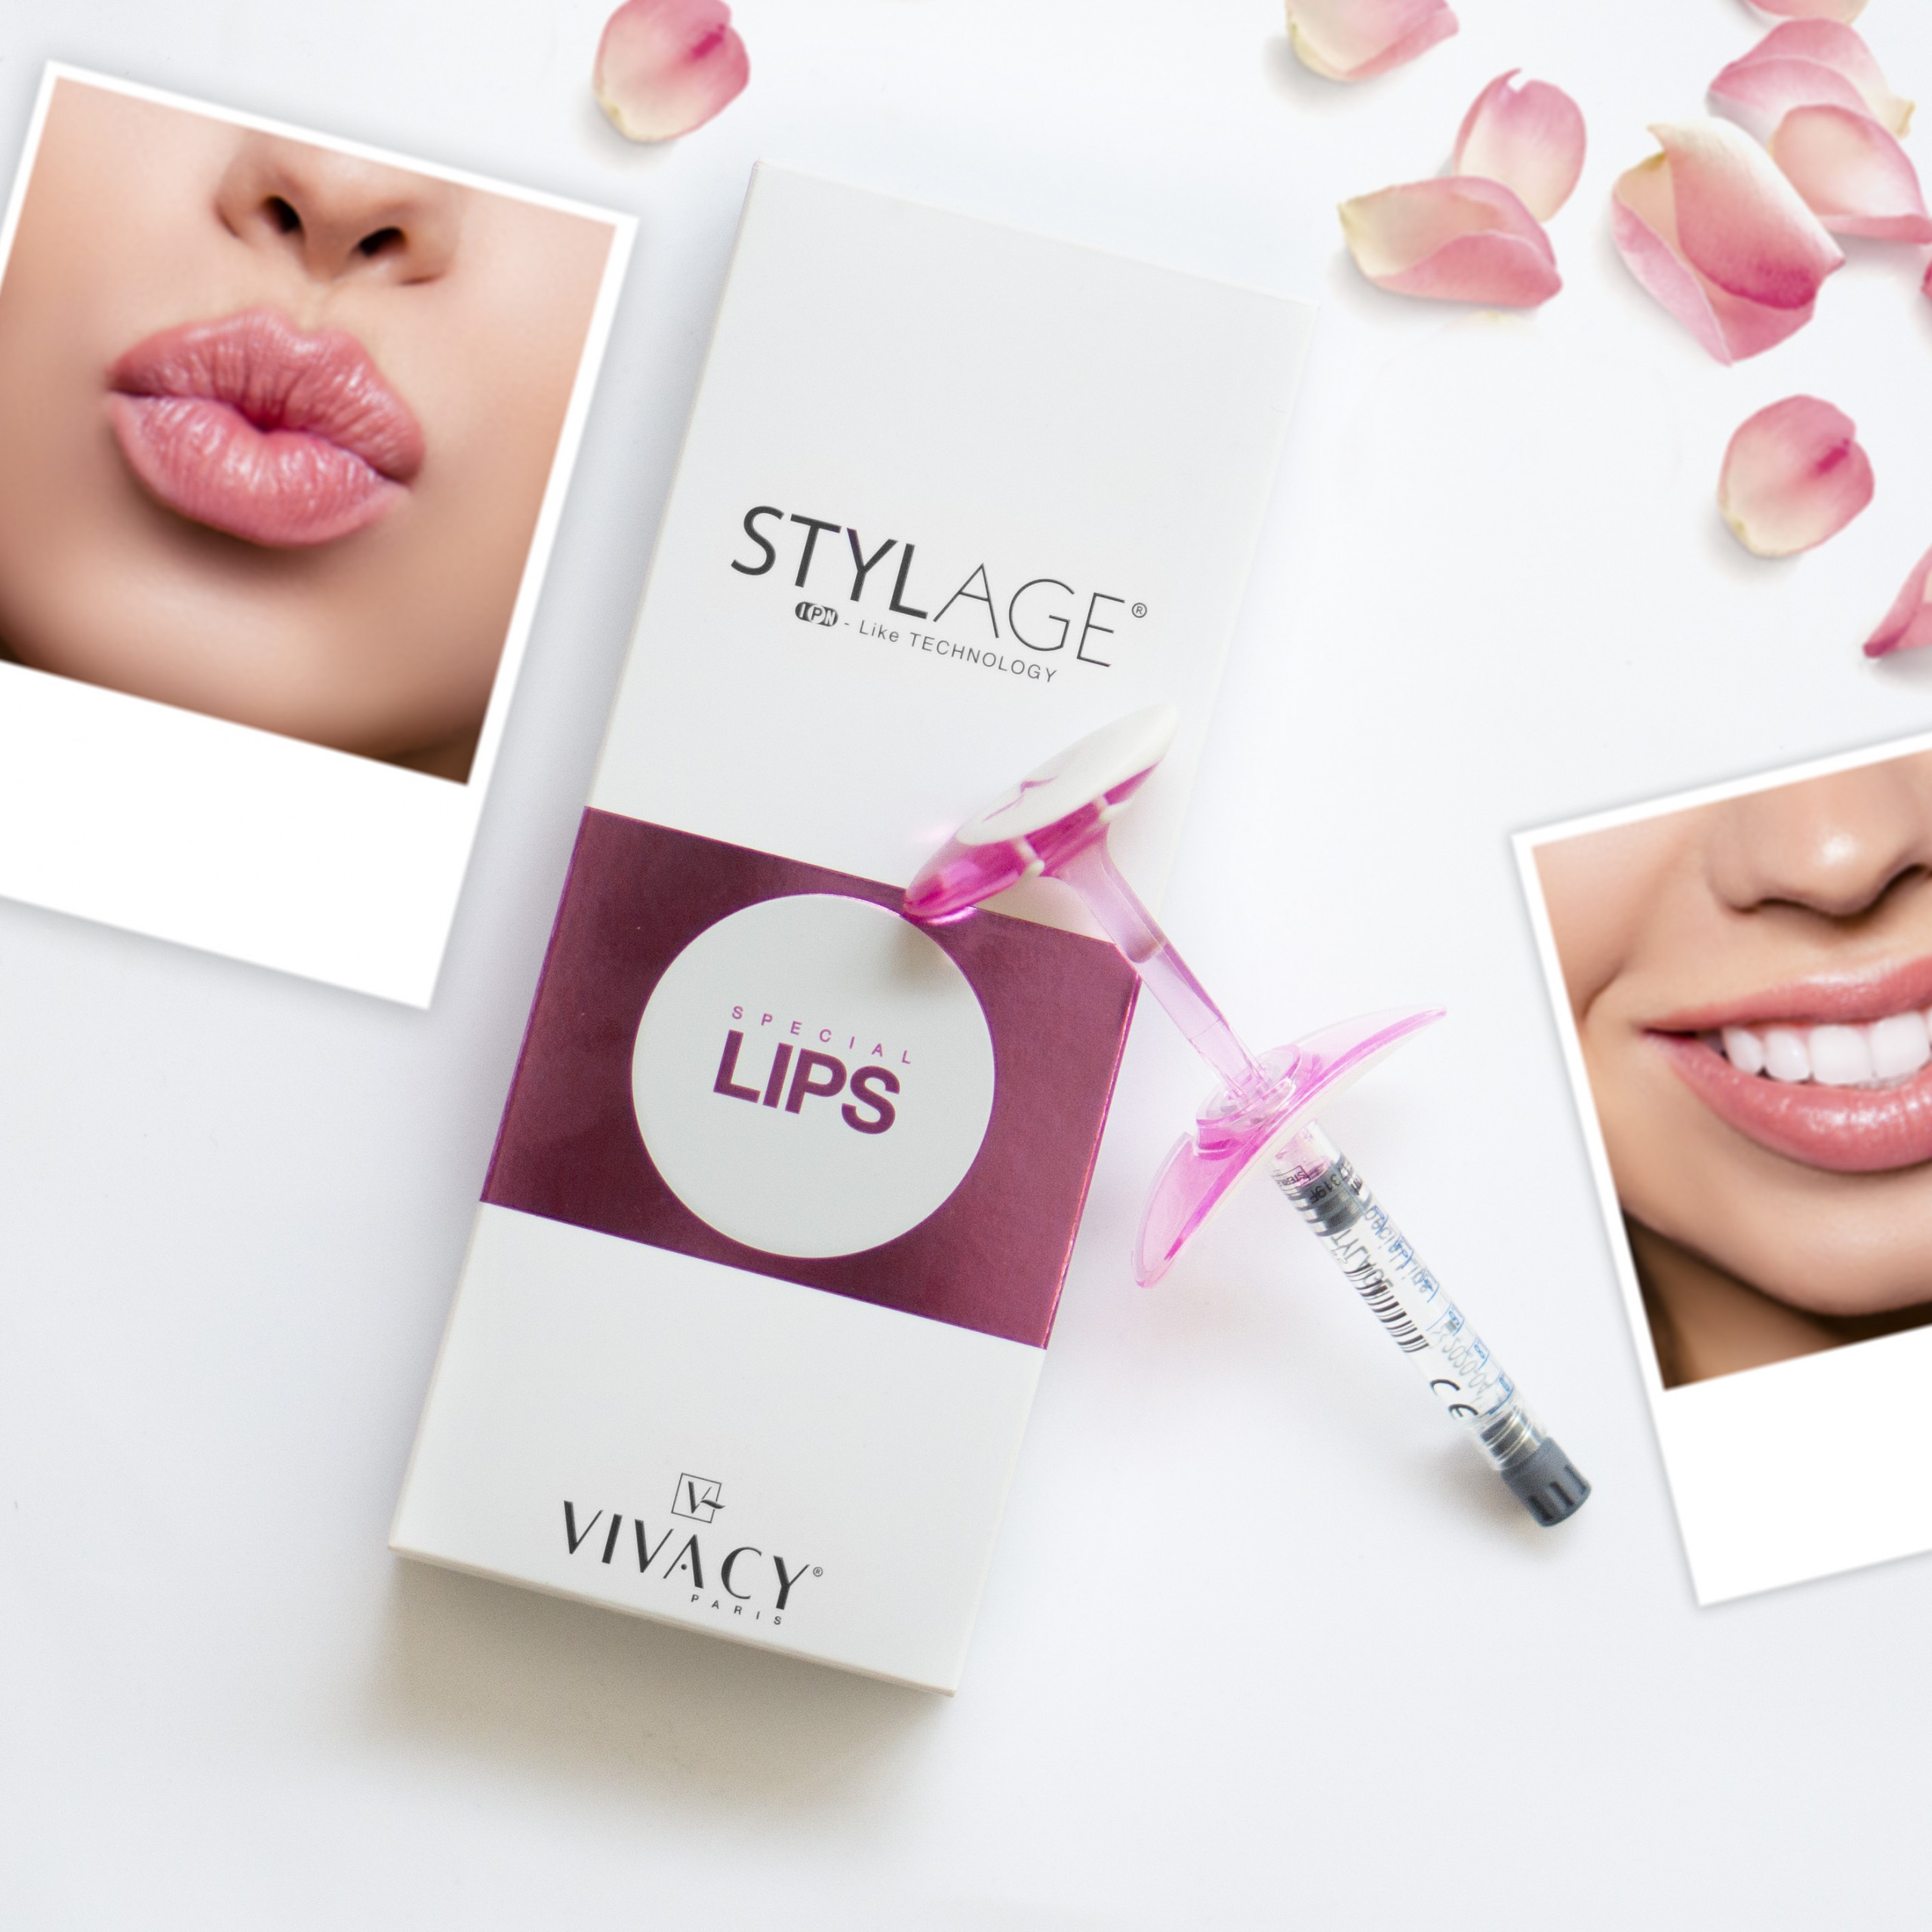 vivacy stylage lips